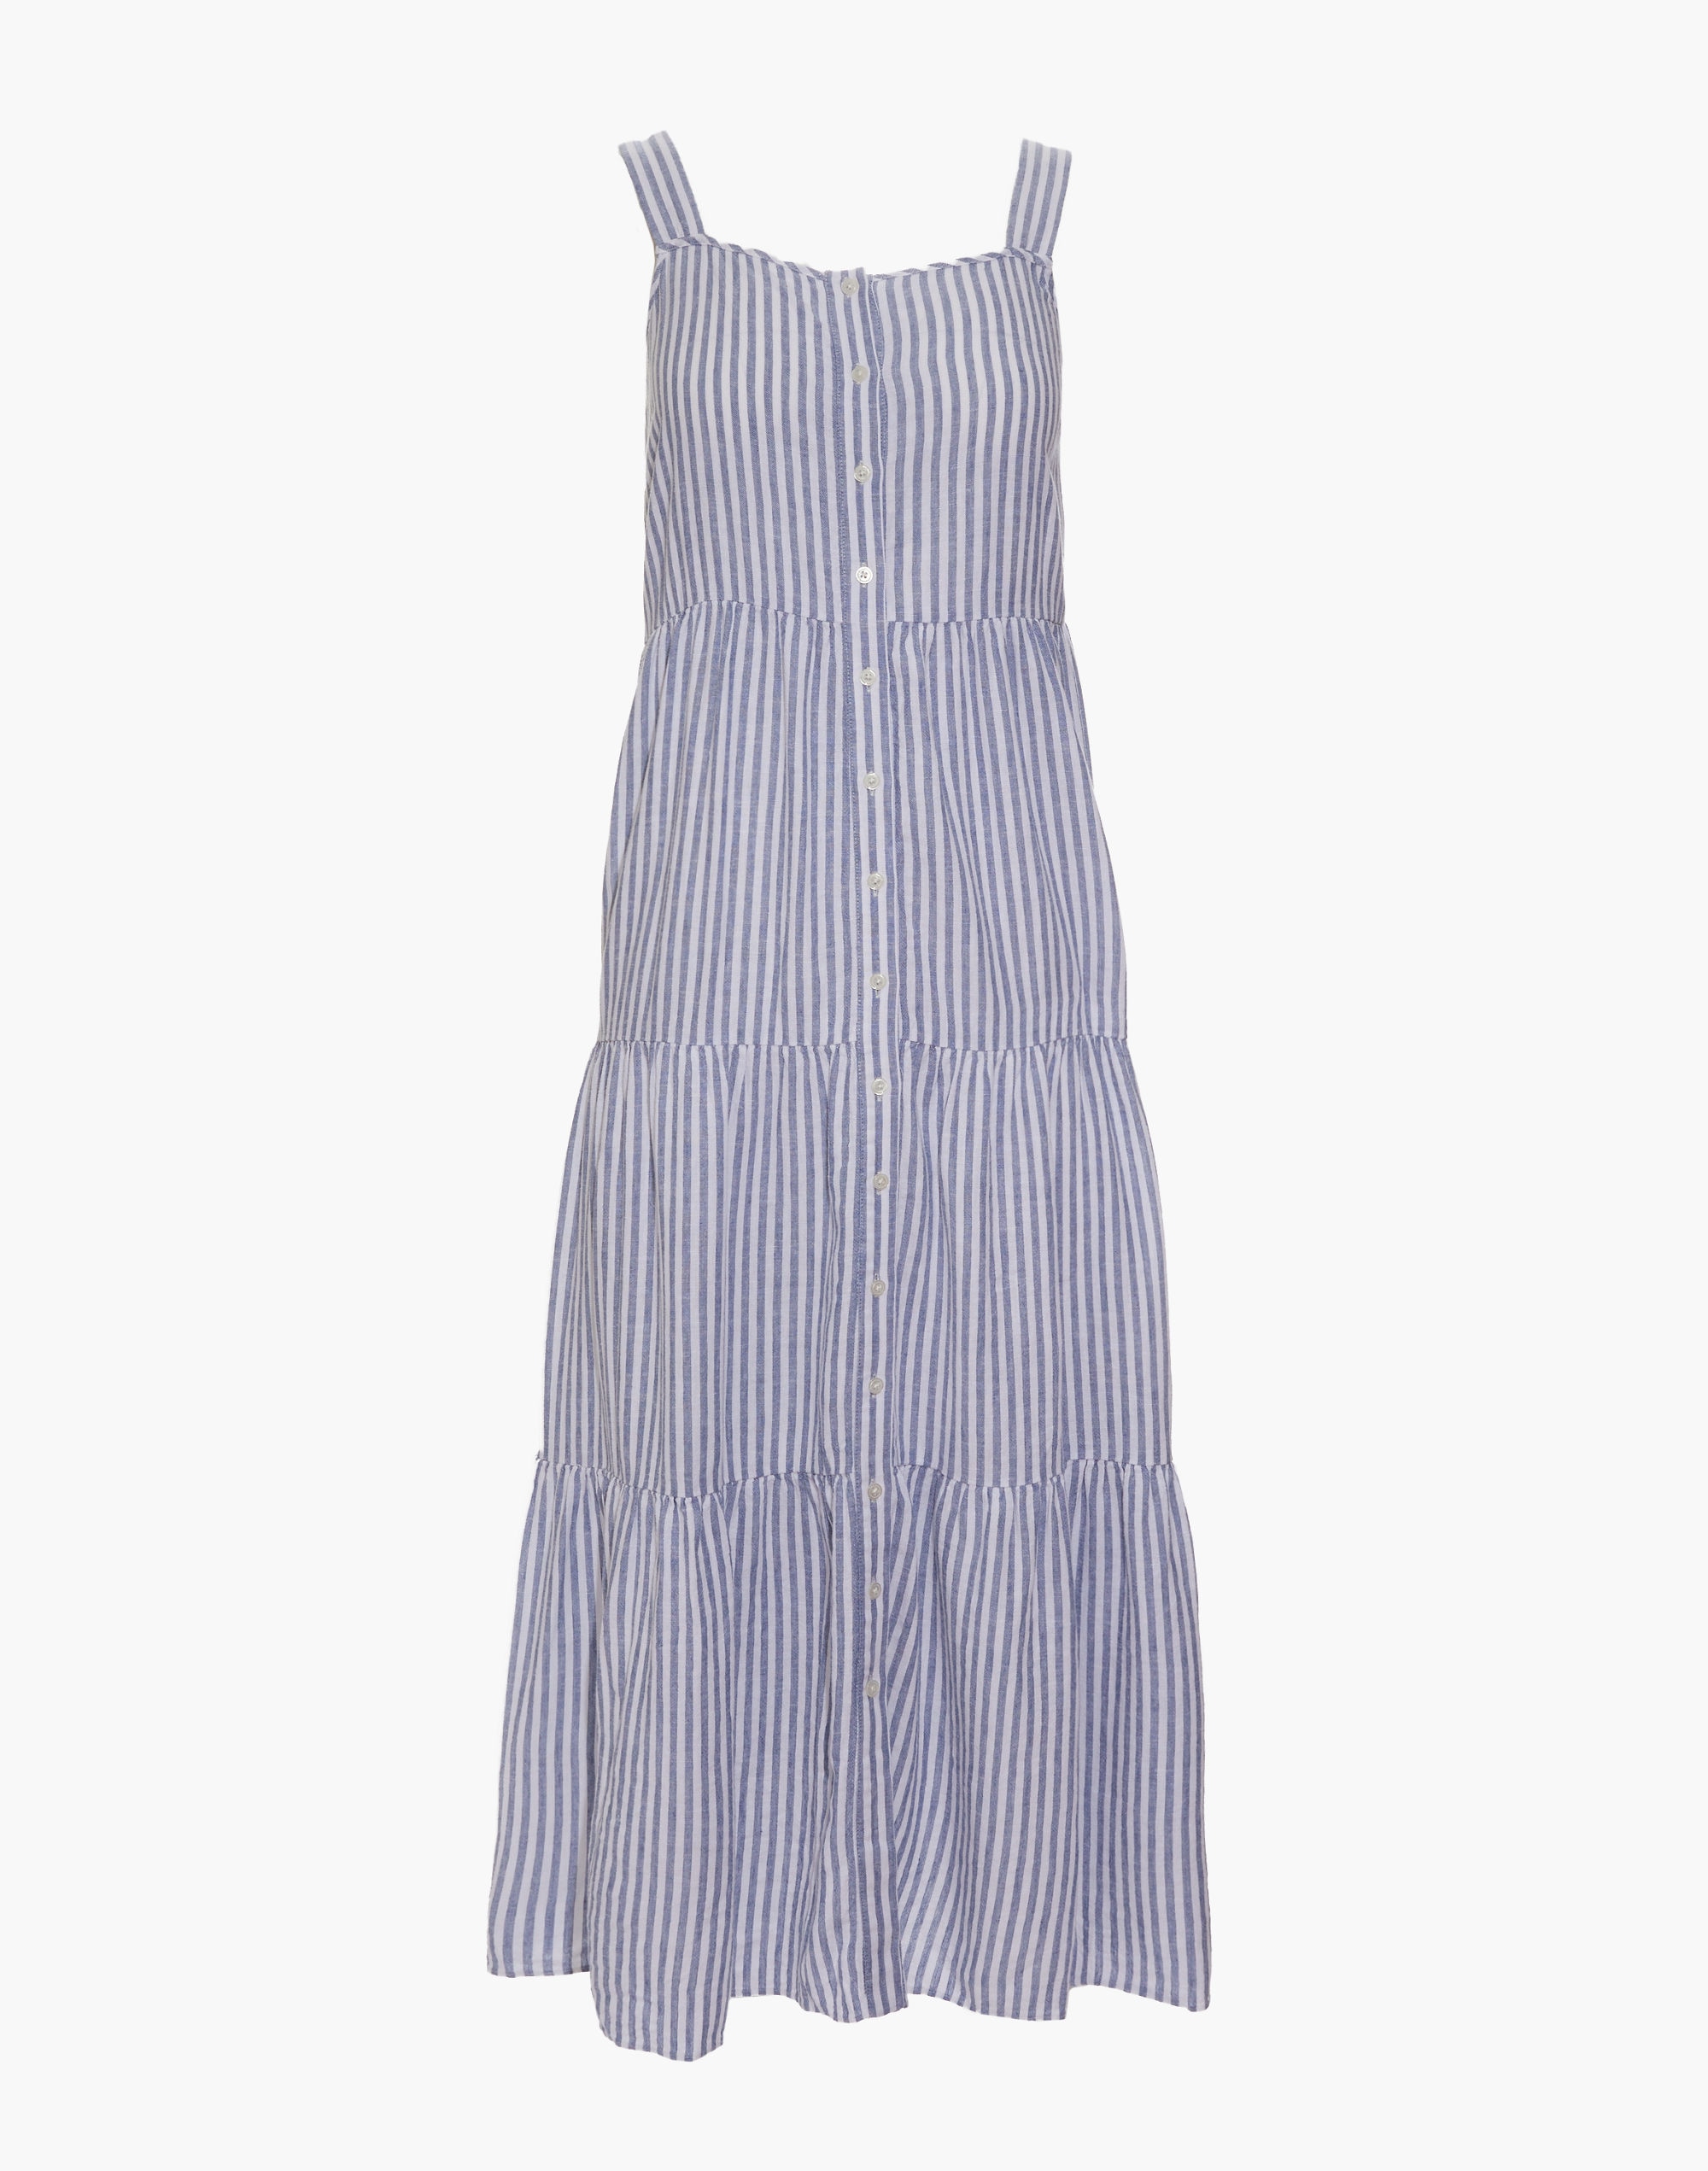 Women's Button Front Tiered Midi Dress in Stripe | Madewell